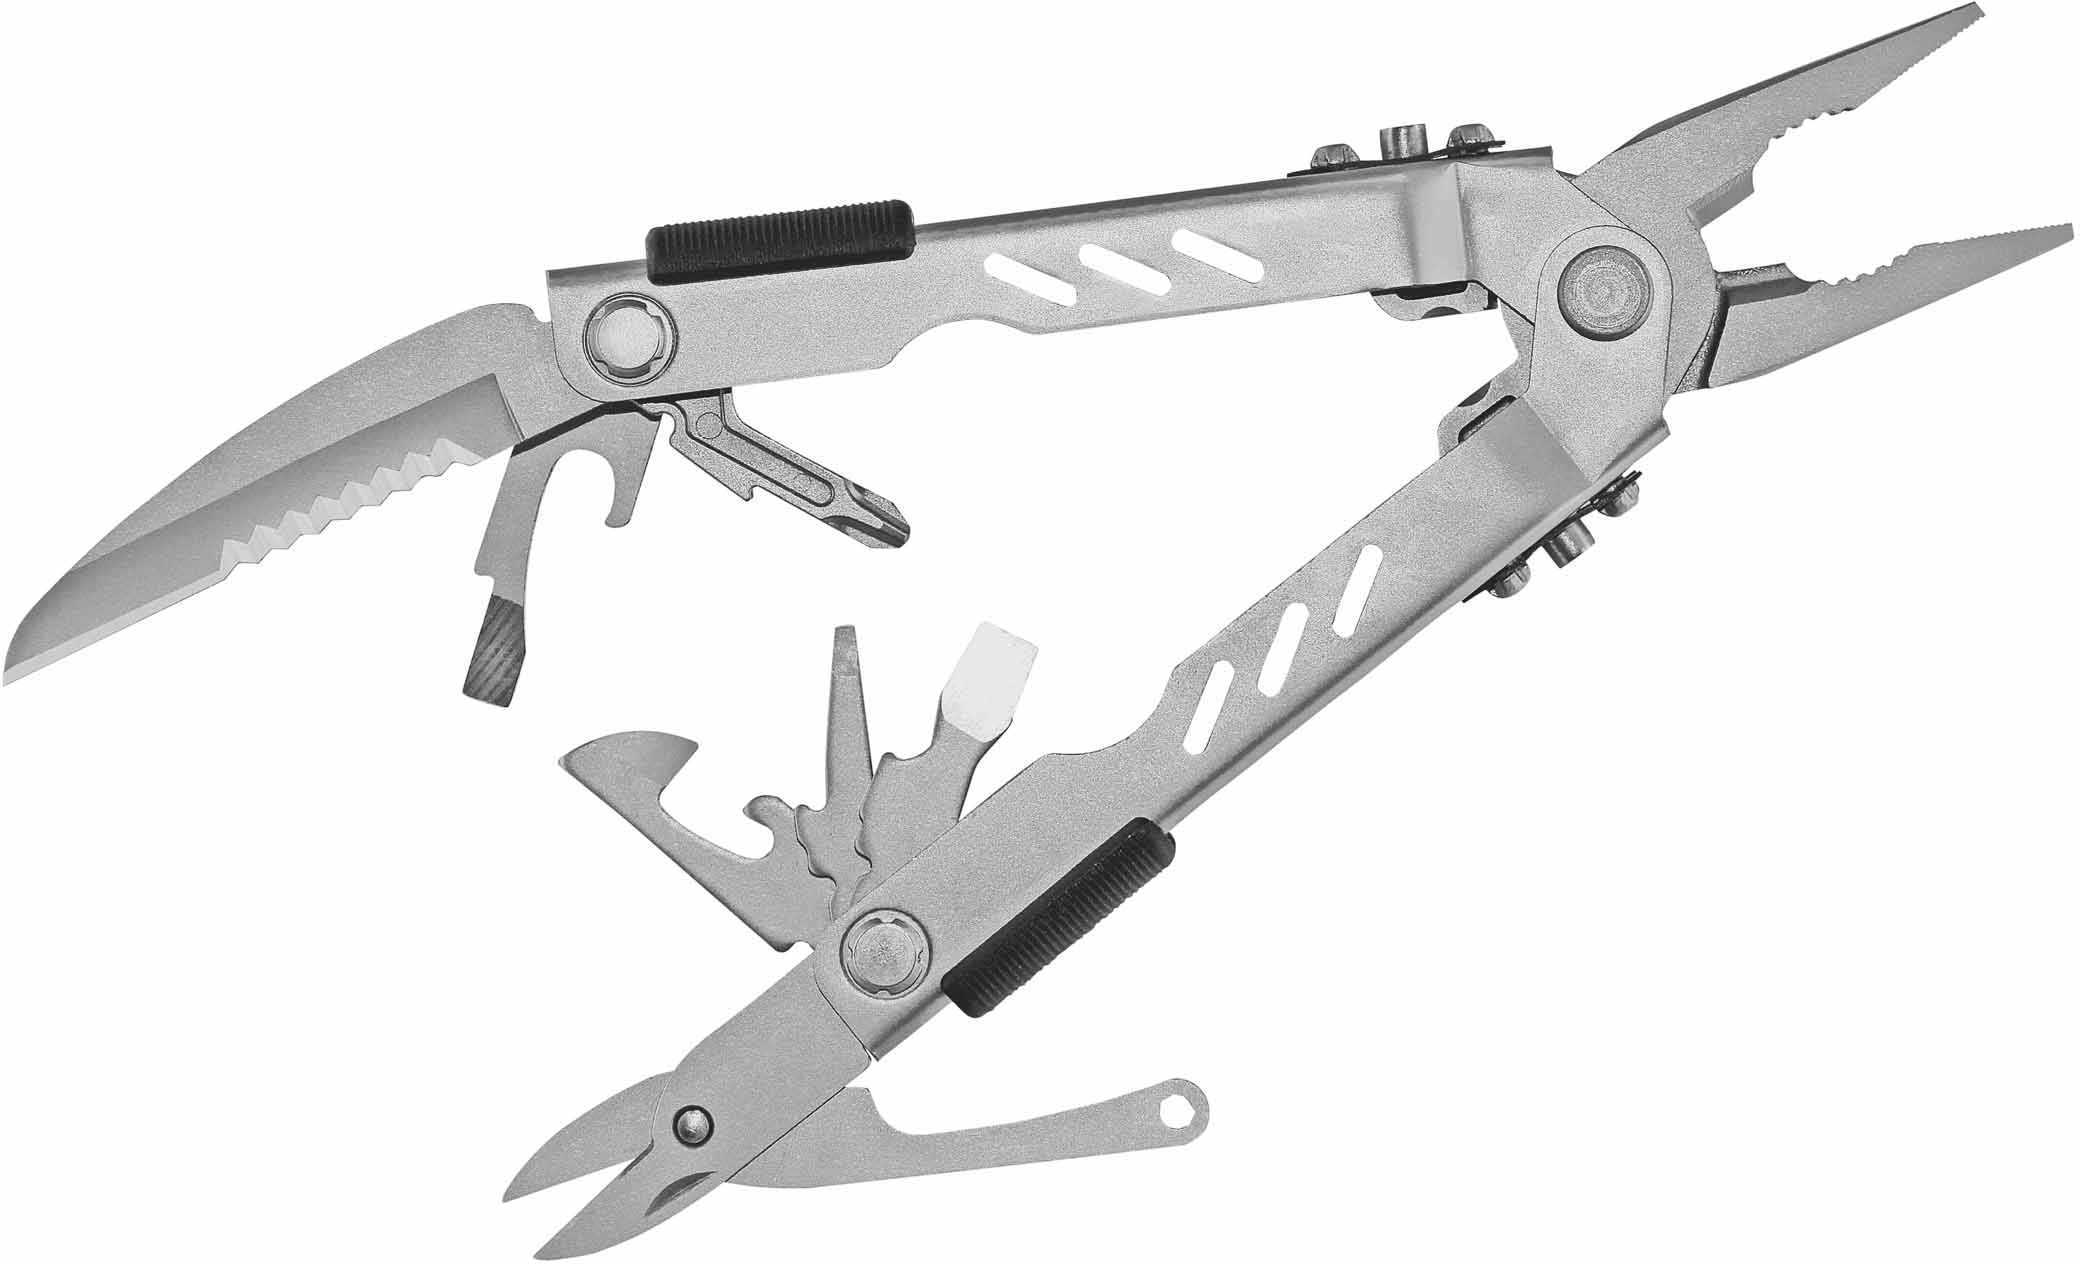 Gerber Multi Tool With Stainless Steel Handle Md: 05500